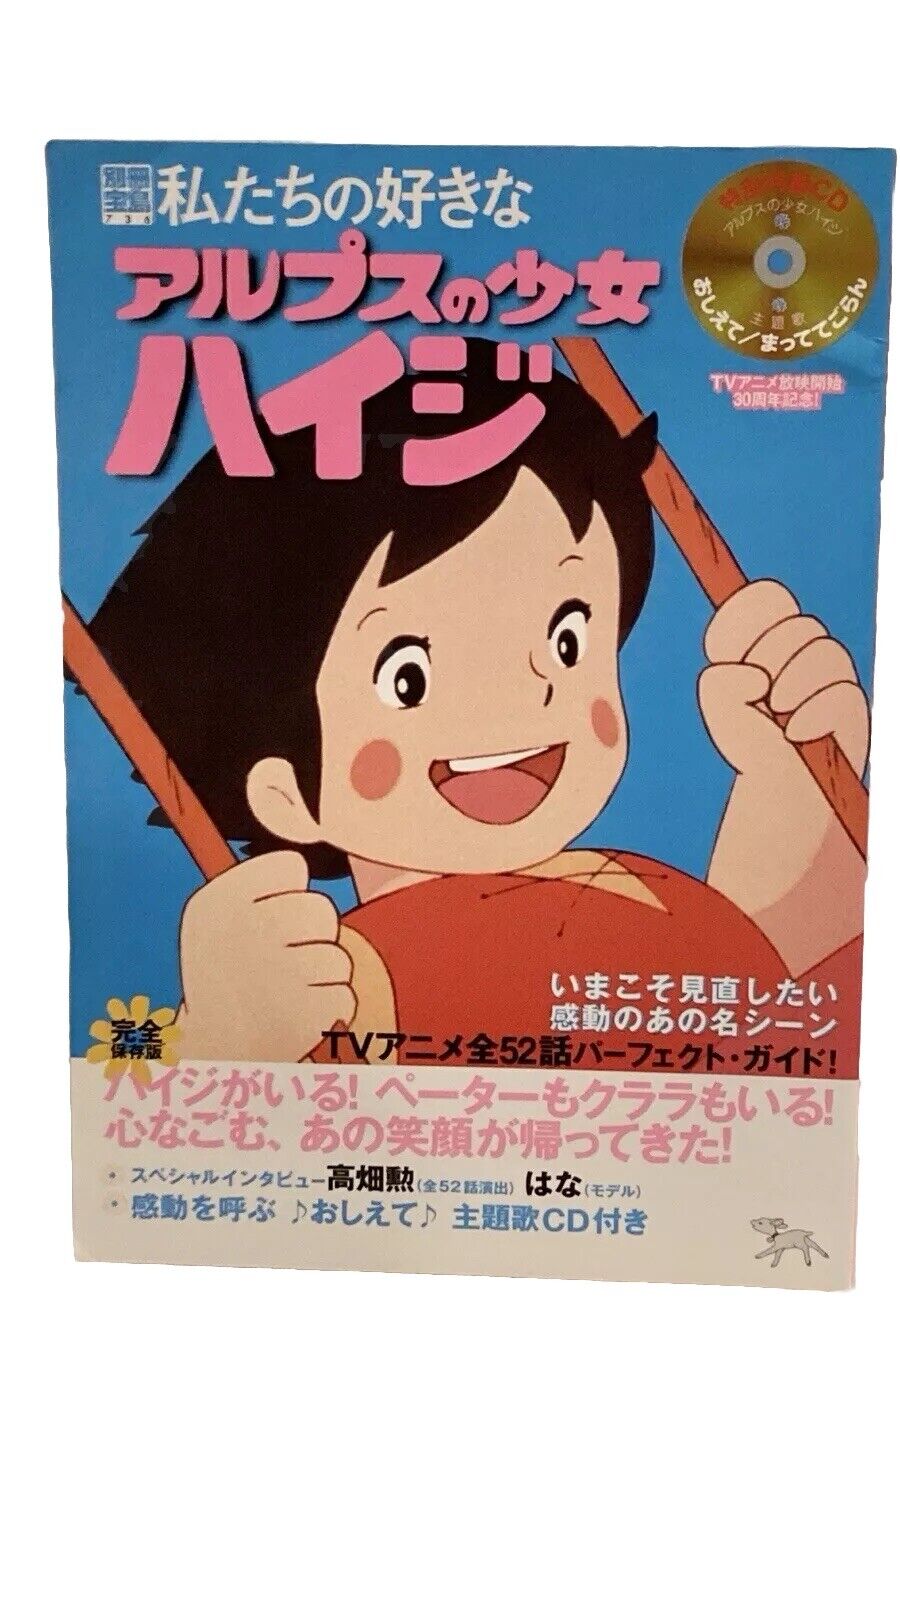 TV Anime Heidi Girl of the Alps Art Book w CD Isao Takahata Excellent Condition